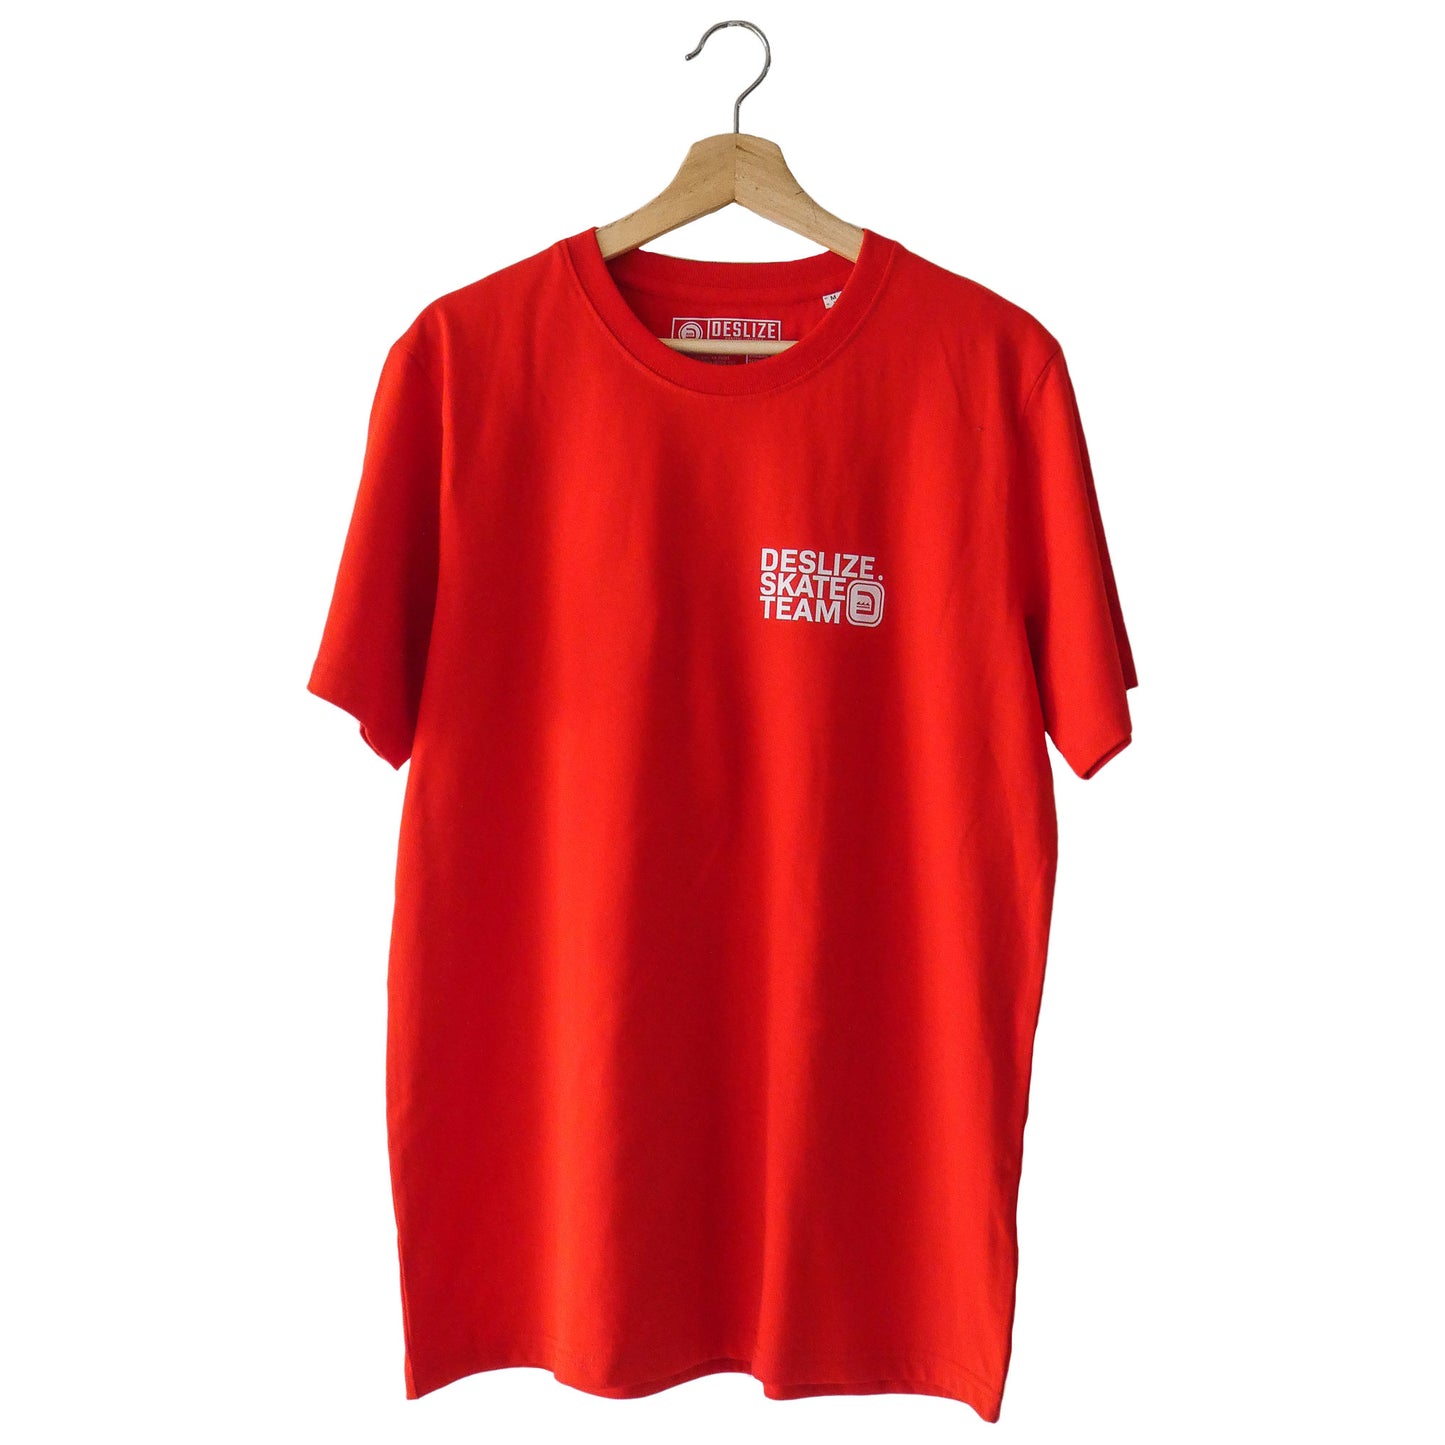 Be Unique Red Skate Tshirt, Front side